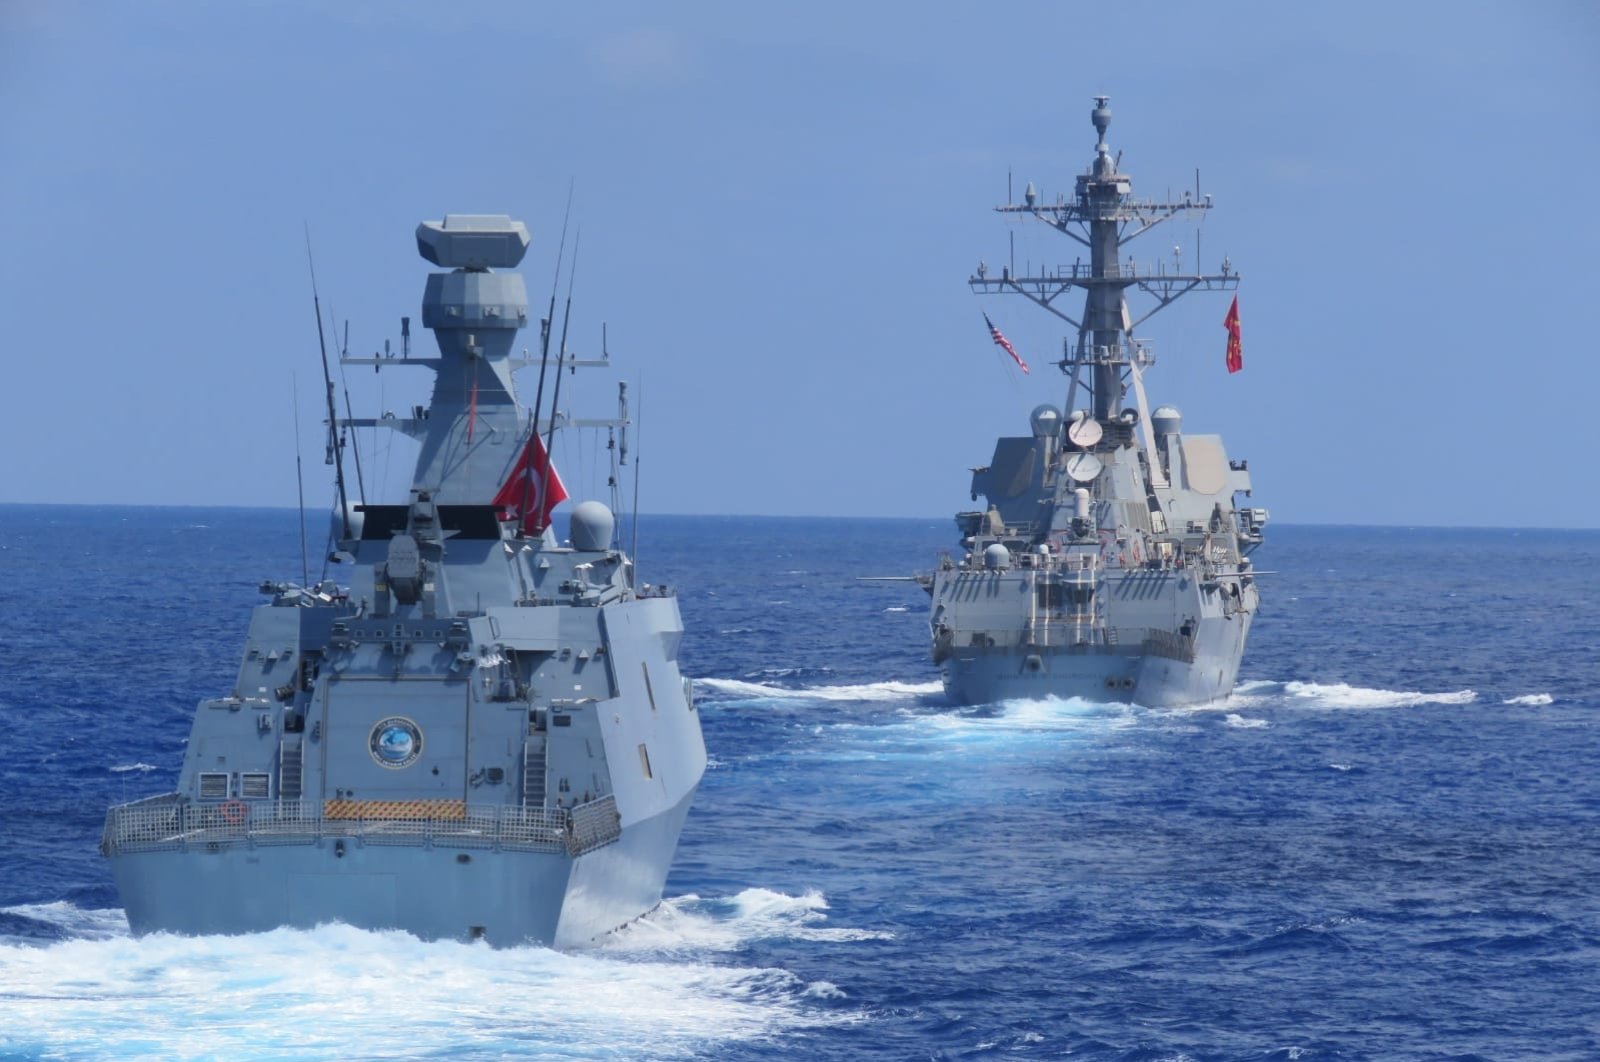 Turkish frigates TCG Barbaros and TCG Burgazada conducts maritime training with American destroyer USS Winston S. Churchill in the Eastern Mediterranean,  Aug. 26, 2020. (DHA)